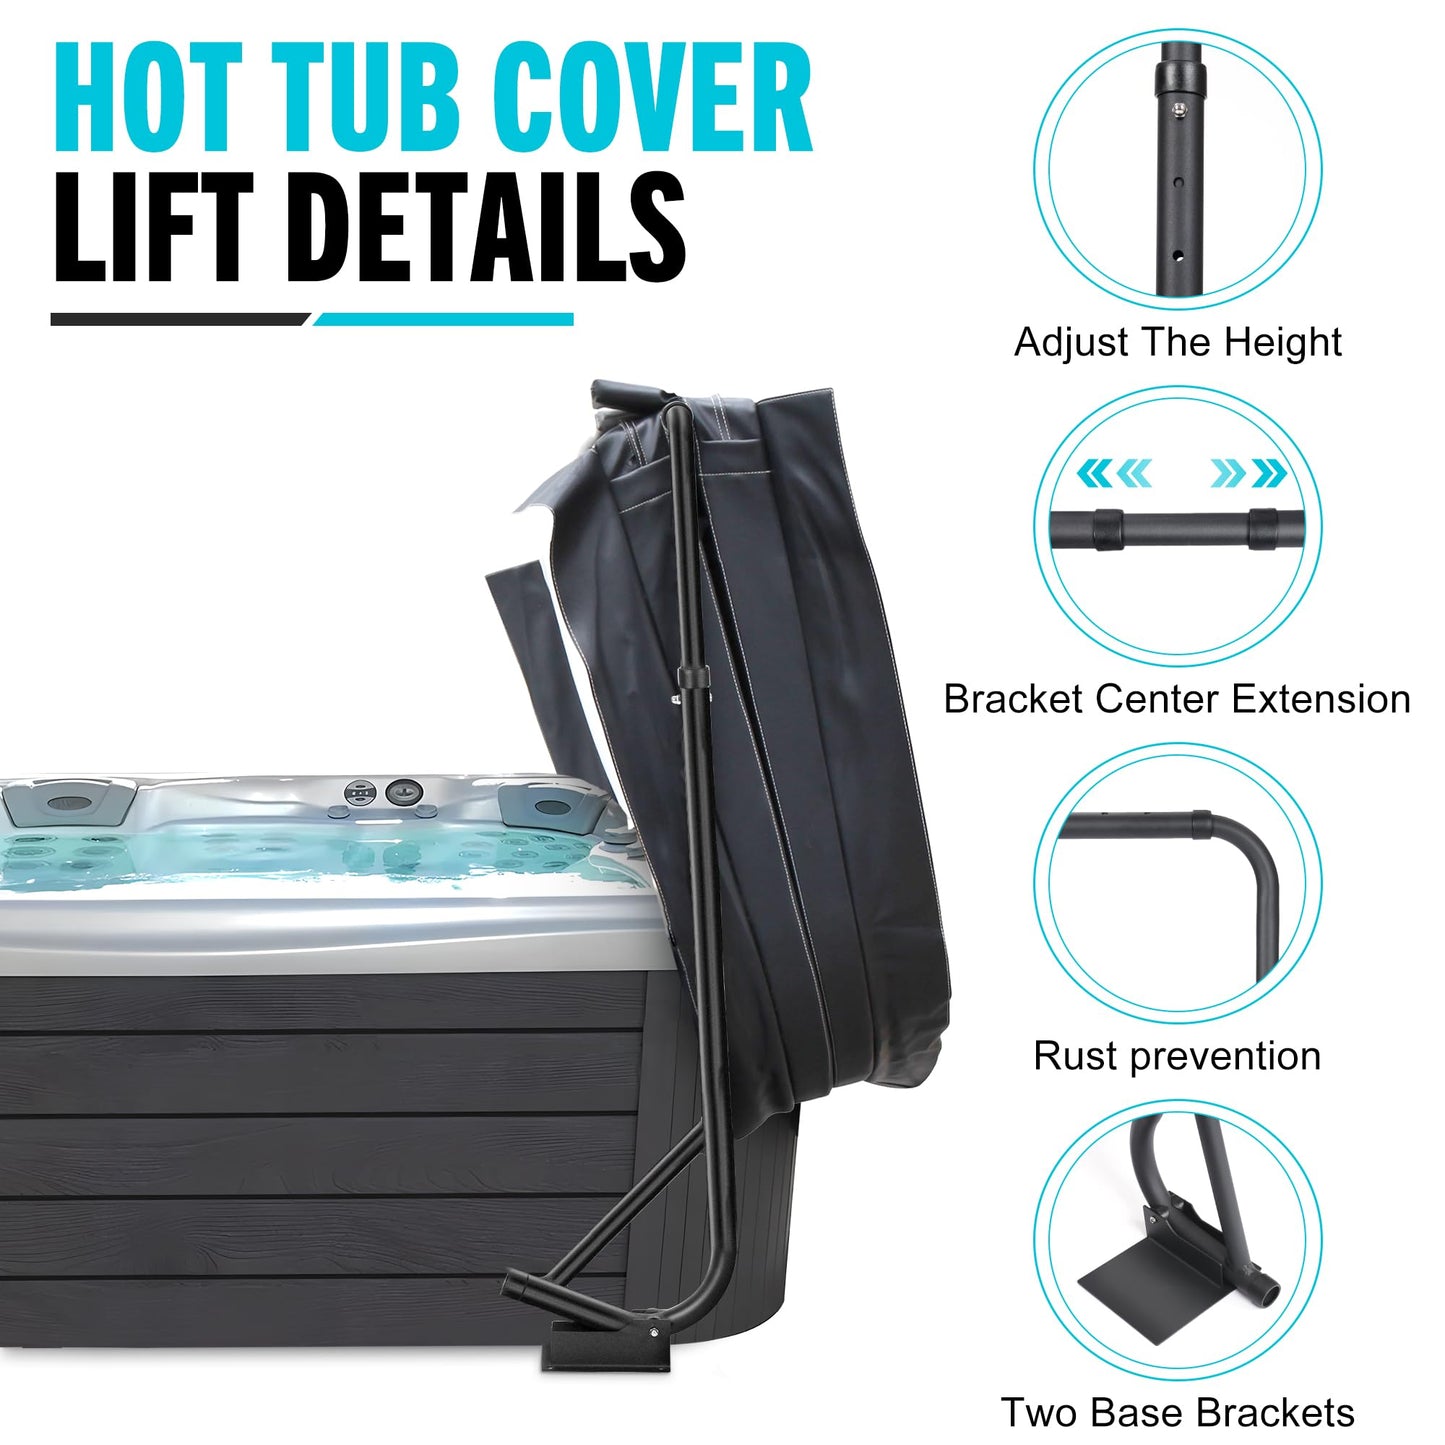 Rengue Hot Tub Cover Lifter, Adjustable Height Spa Cover Lift Hot Tub Cover Lift Removal System Fit for Most Spa Hot Tubs Adjustable Reinforced Frame